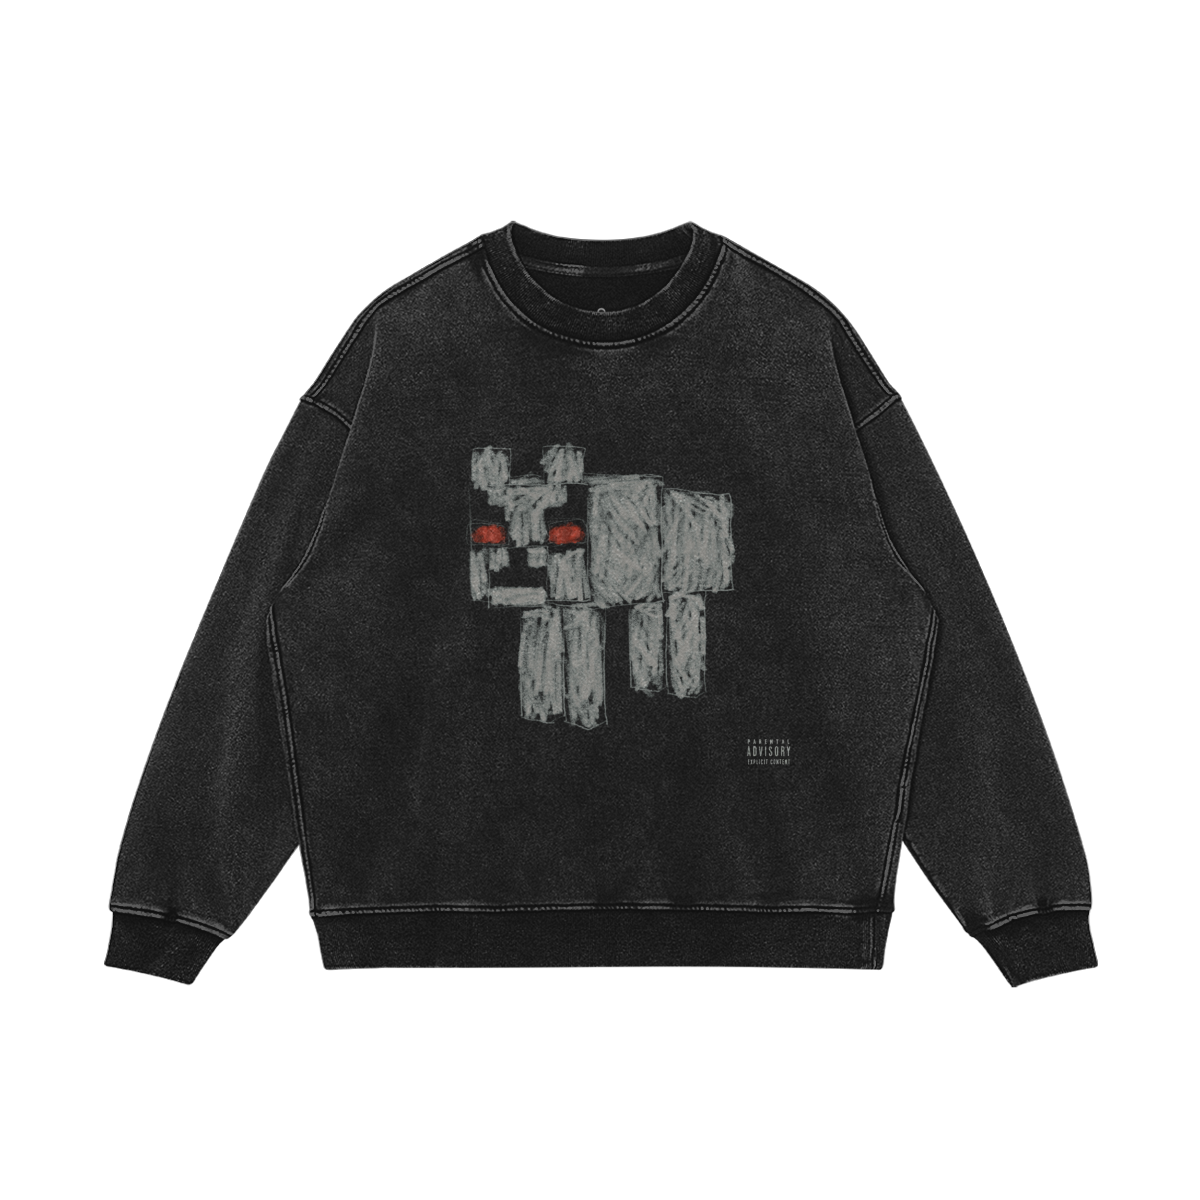 FOR ALL THE DOGS x MINECRAFT CREWNECK